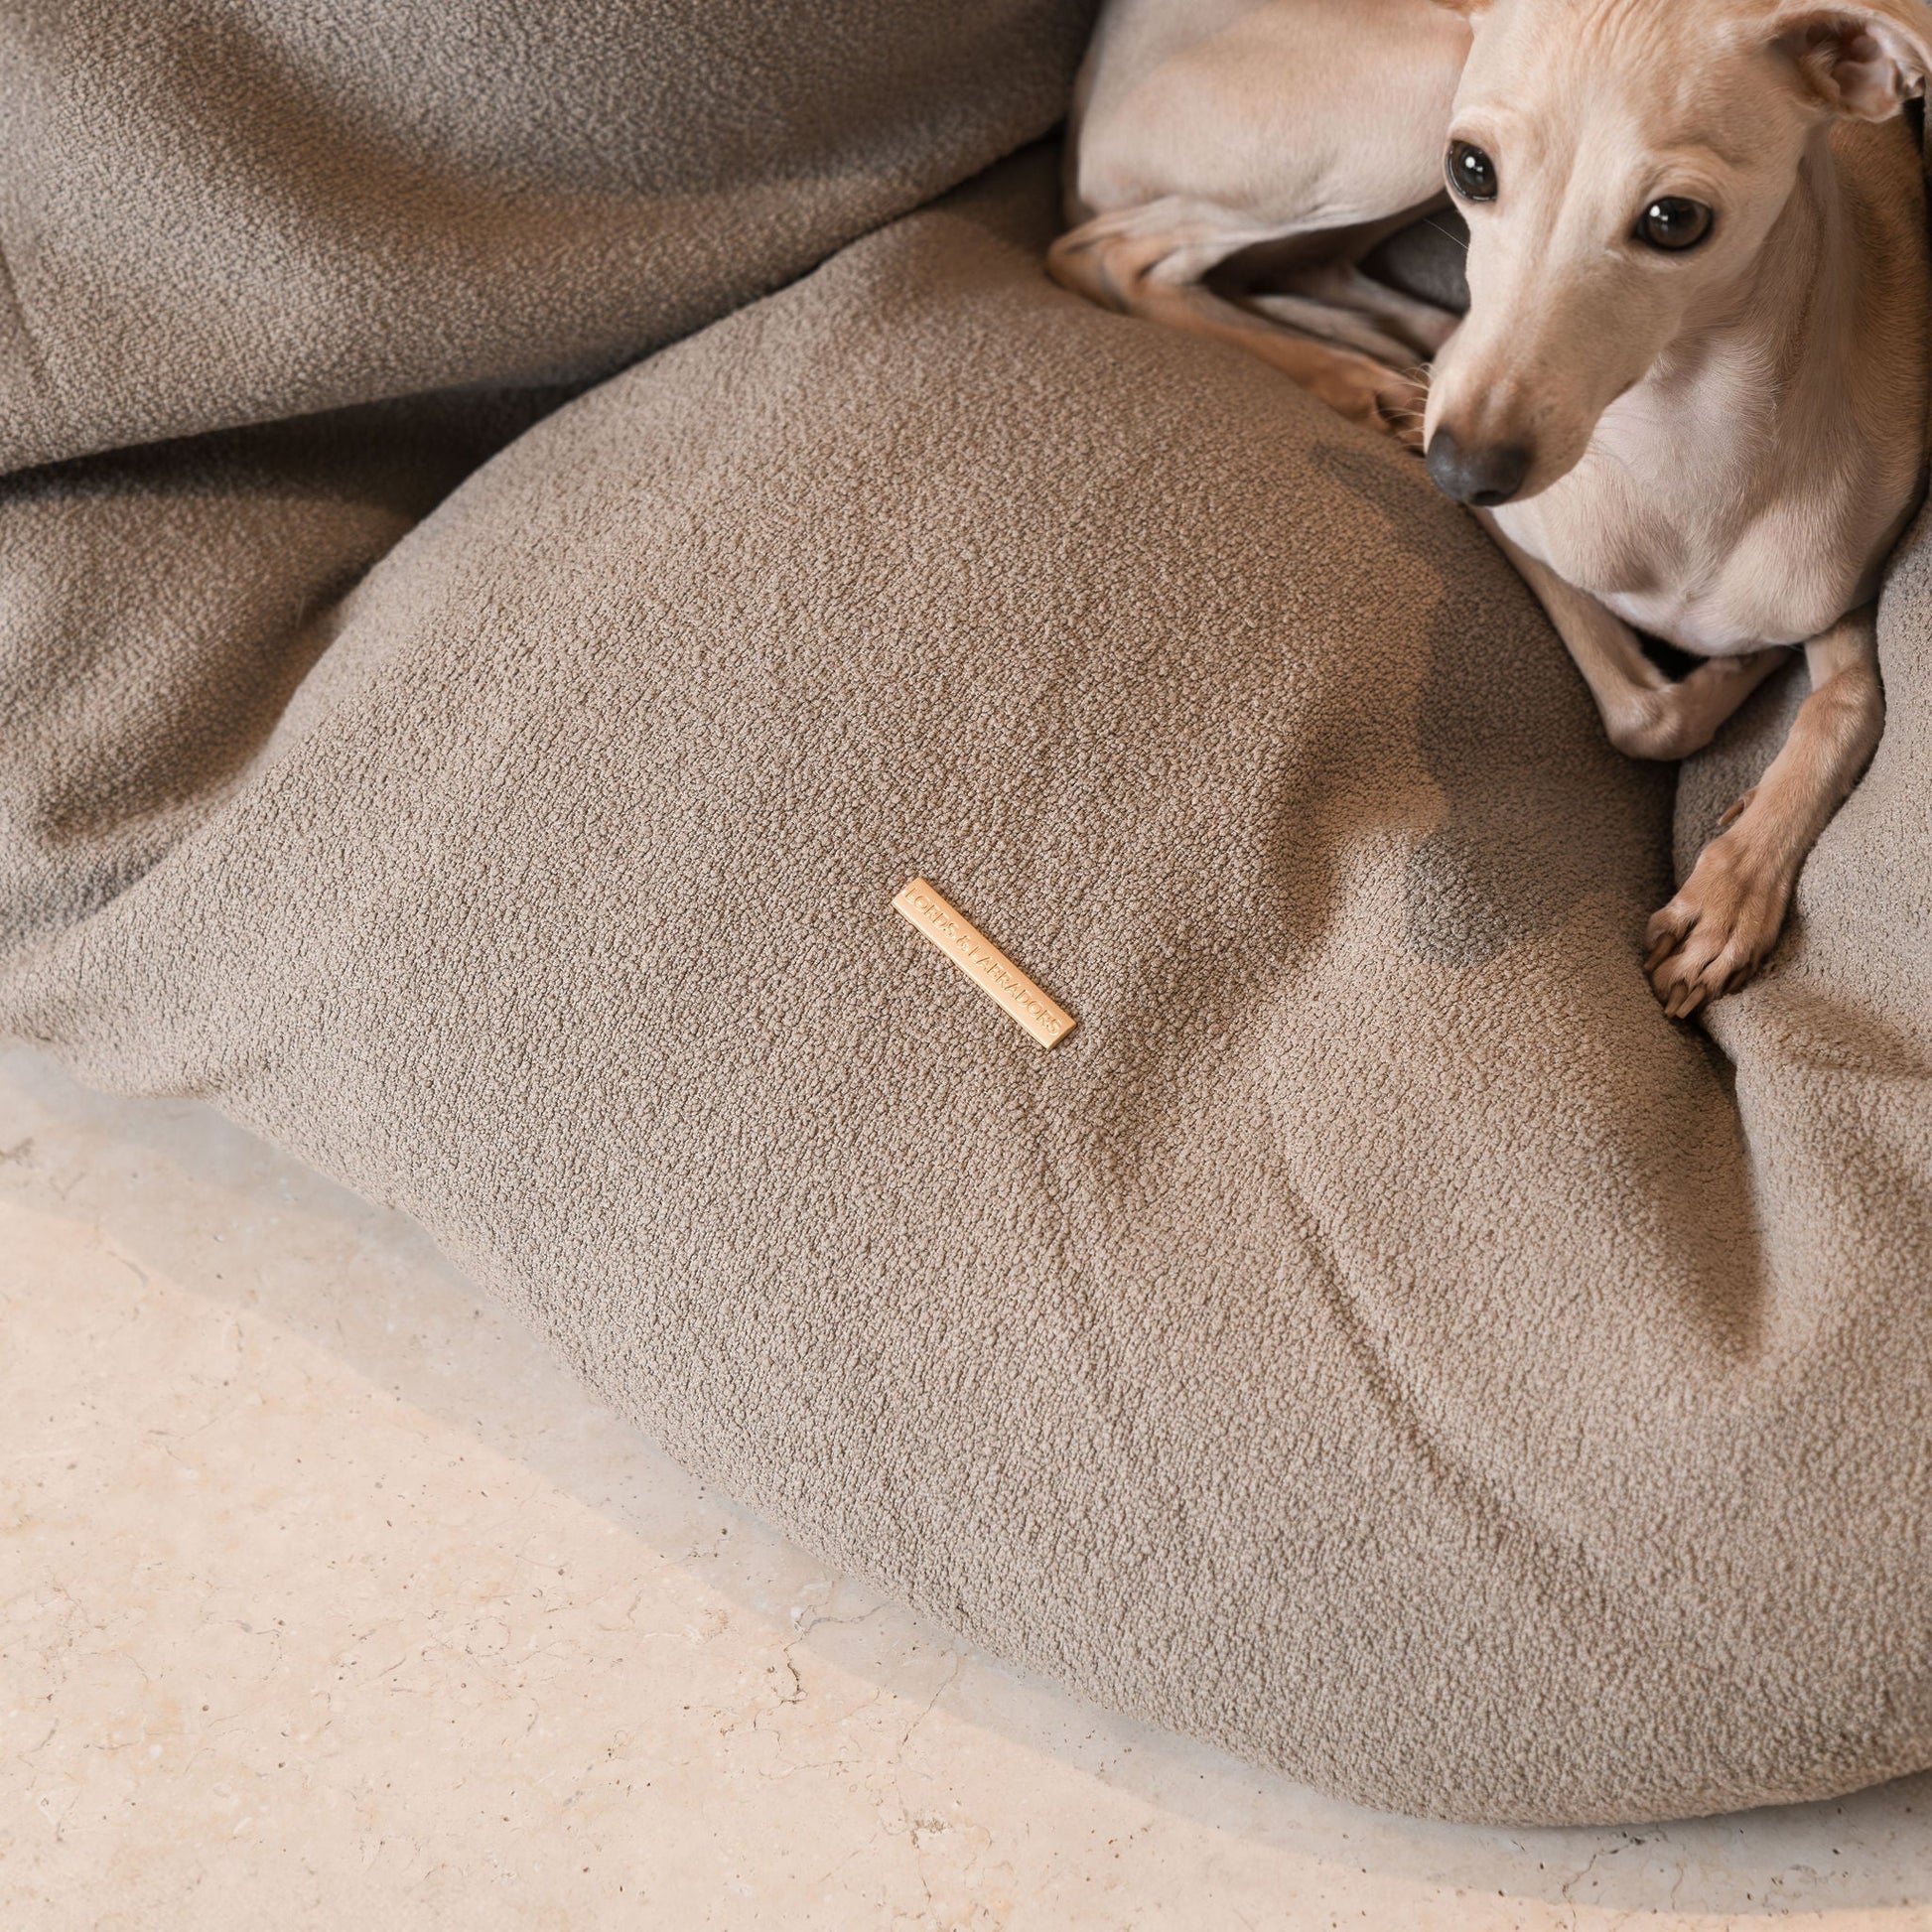 Luxury Dog Cushions & Beds, in Squash 'Em in Putty, The Perfect Snuggly Cave For Dogs To Burrow! Available Now at Lords & Labradors US